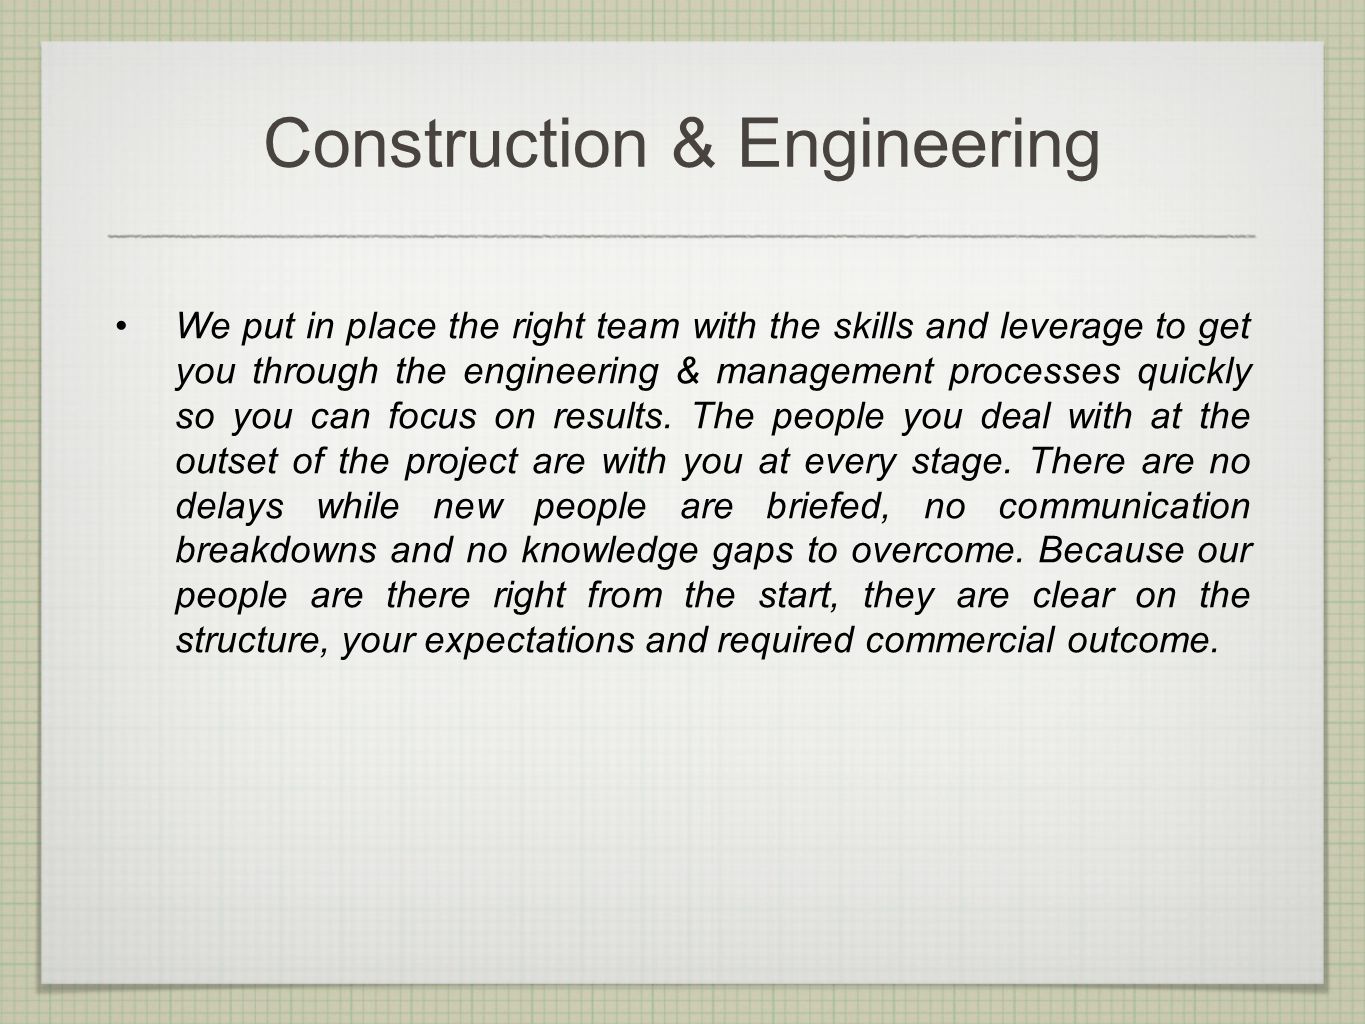 Construction & Engineering We put in place the right team with the skills and leverage to get you through the engineering & management processes quickly so you can focus on results.